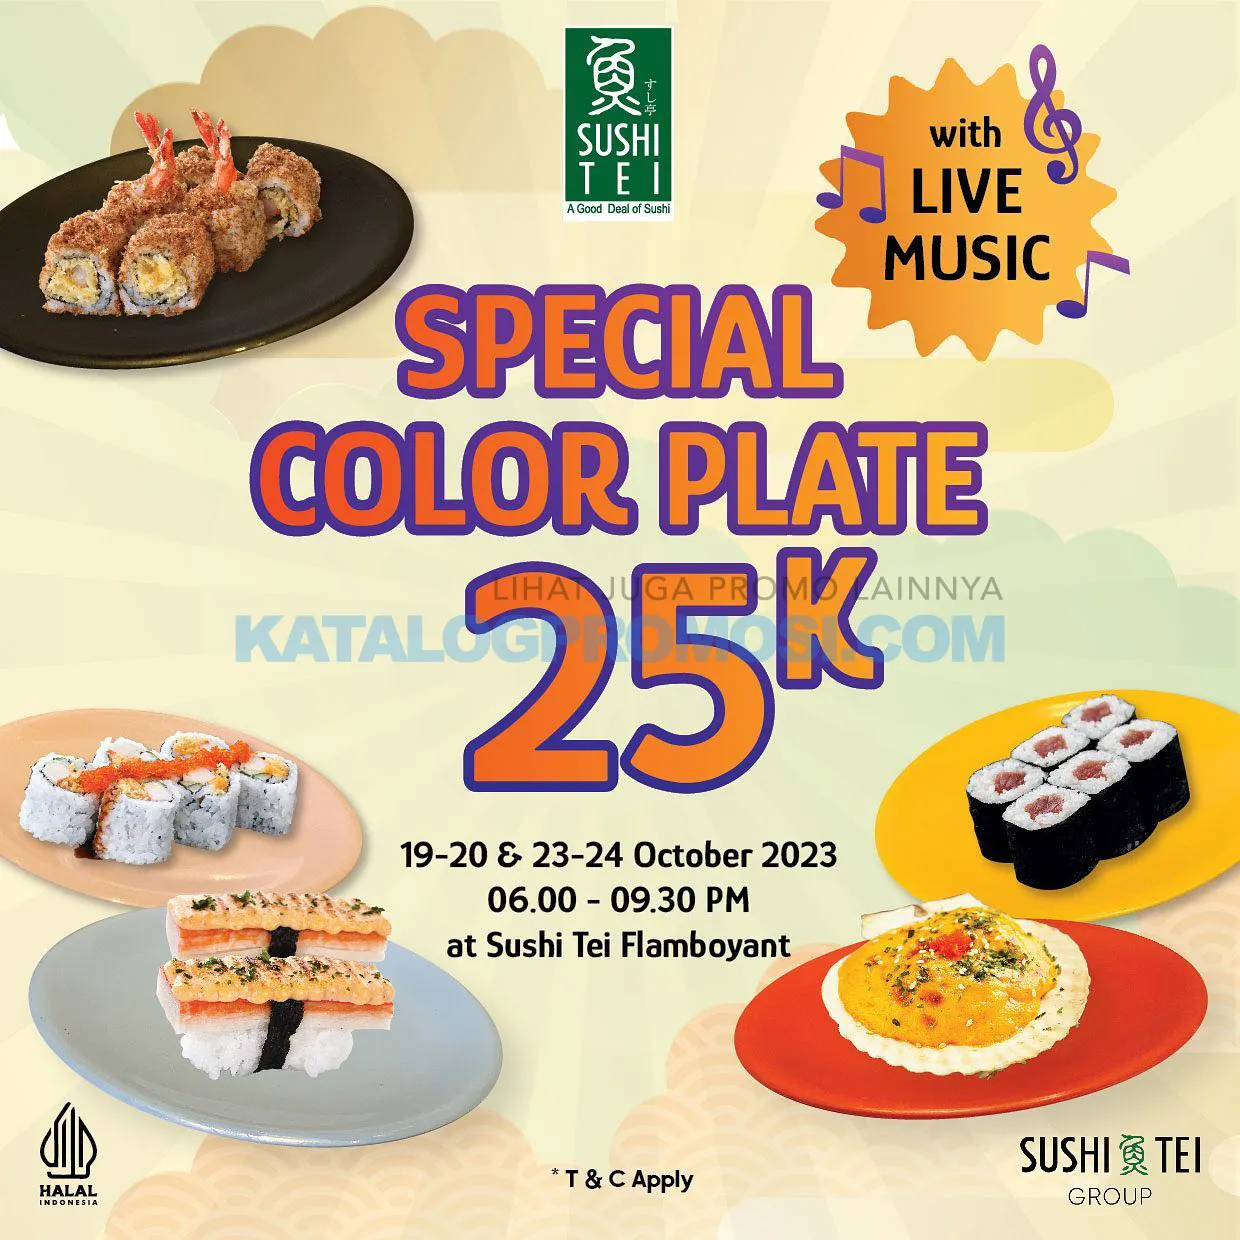 Promo Sushi Tei Flamboyant Bandung - ALL COLOR PLATE Only Rp. 25.000++